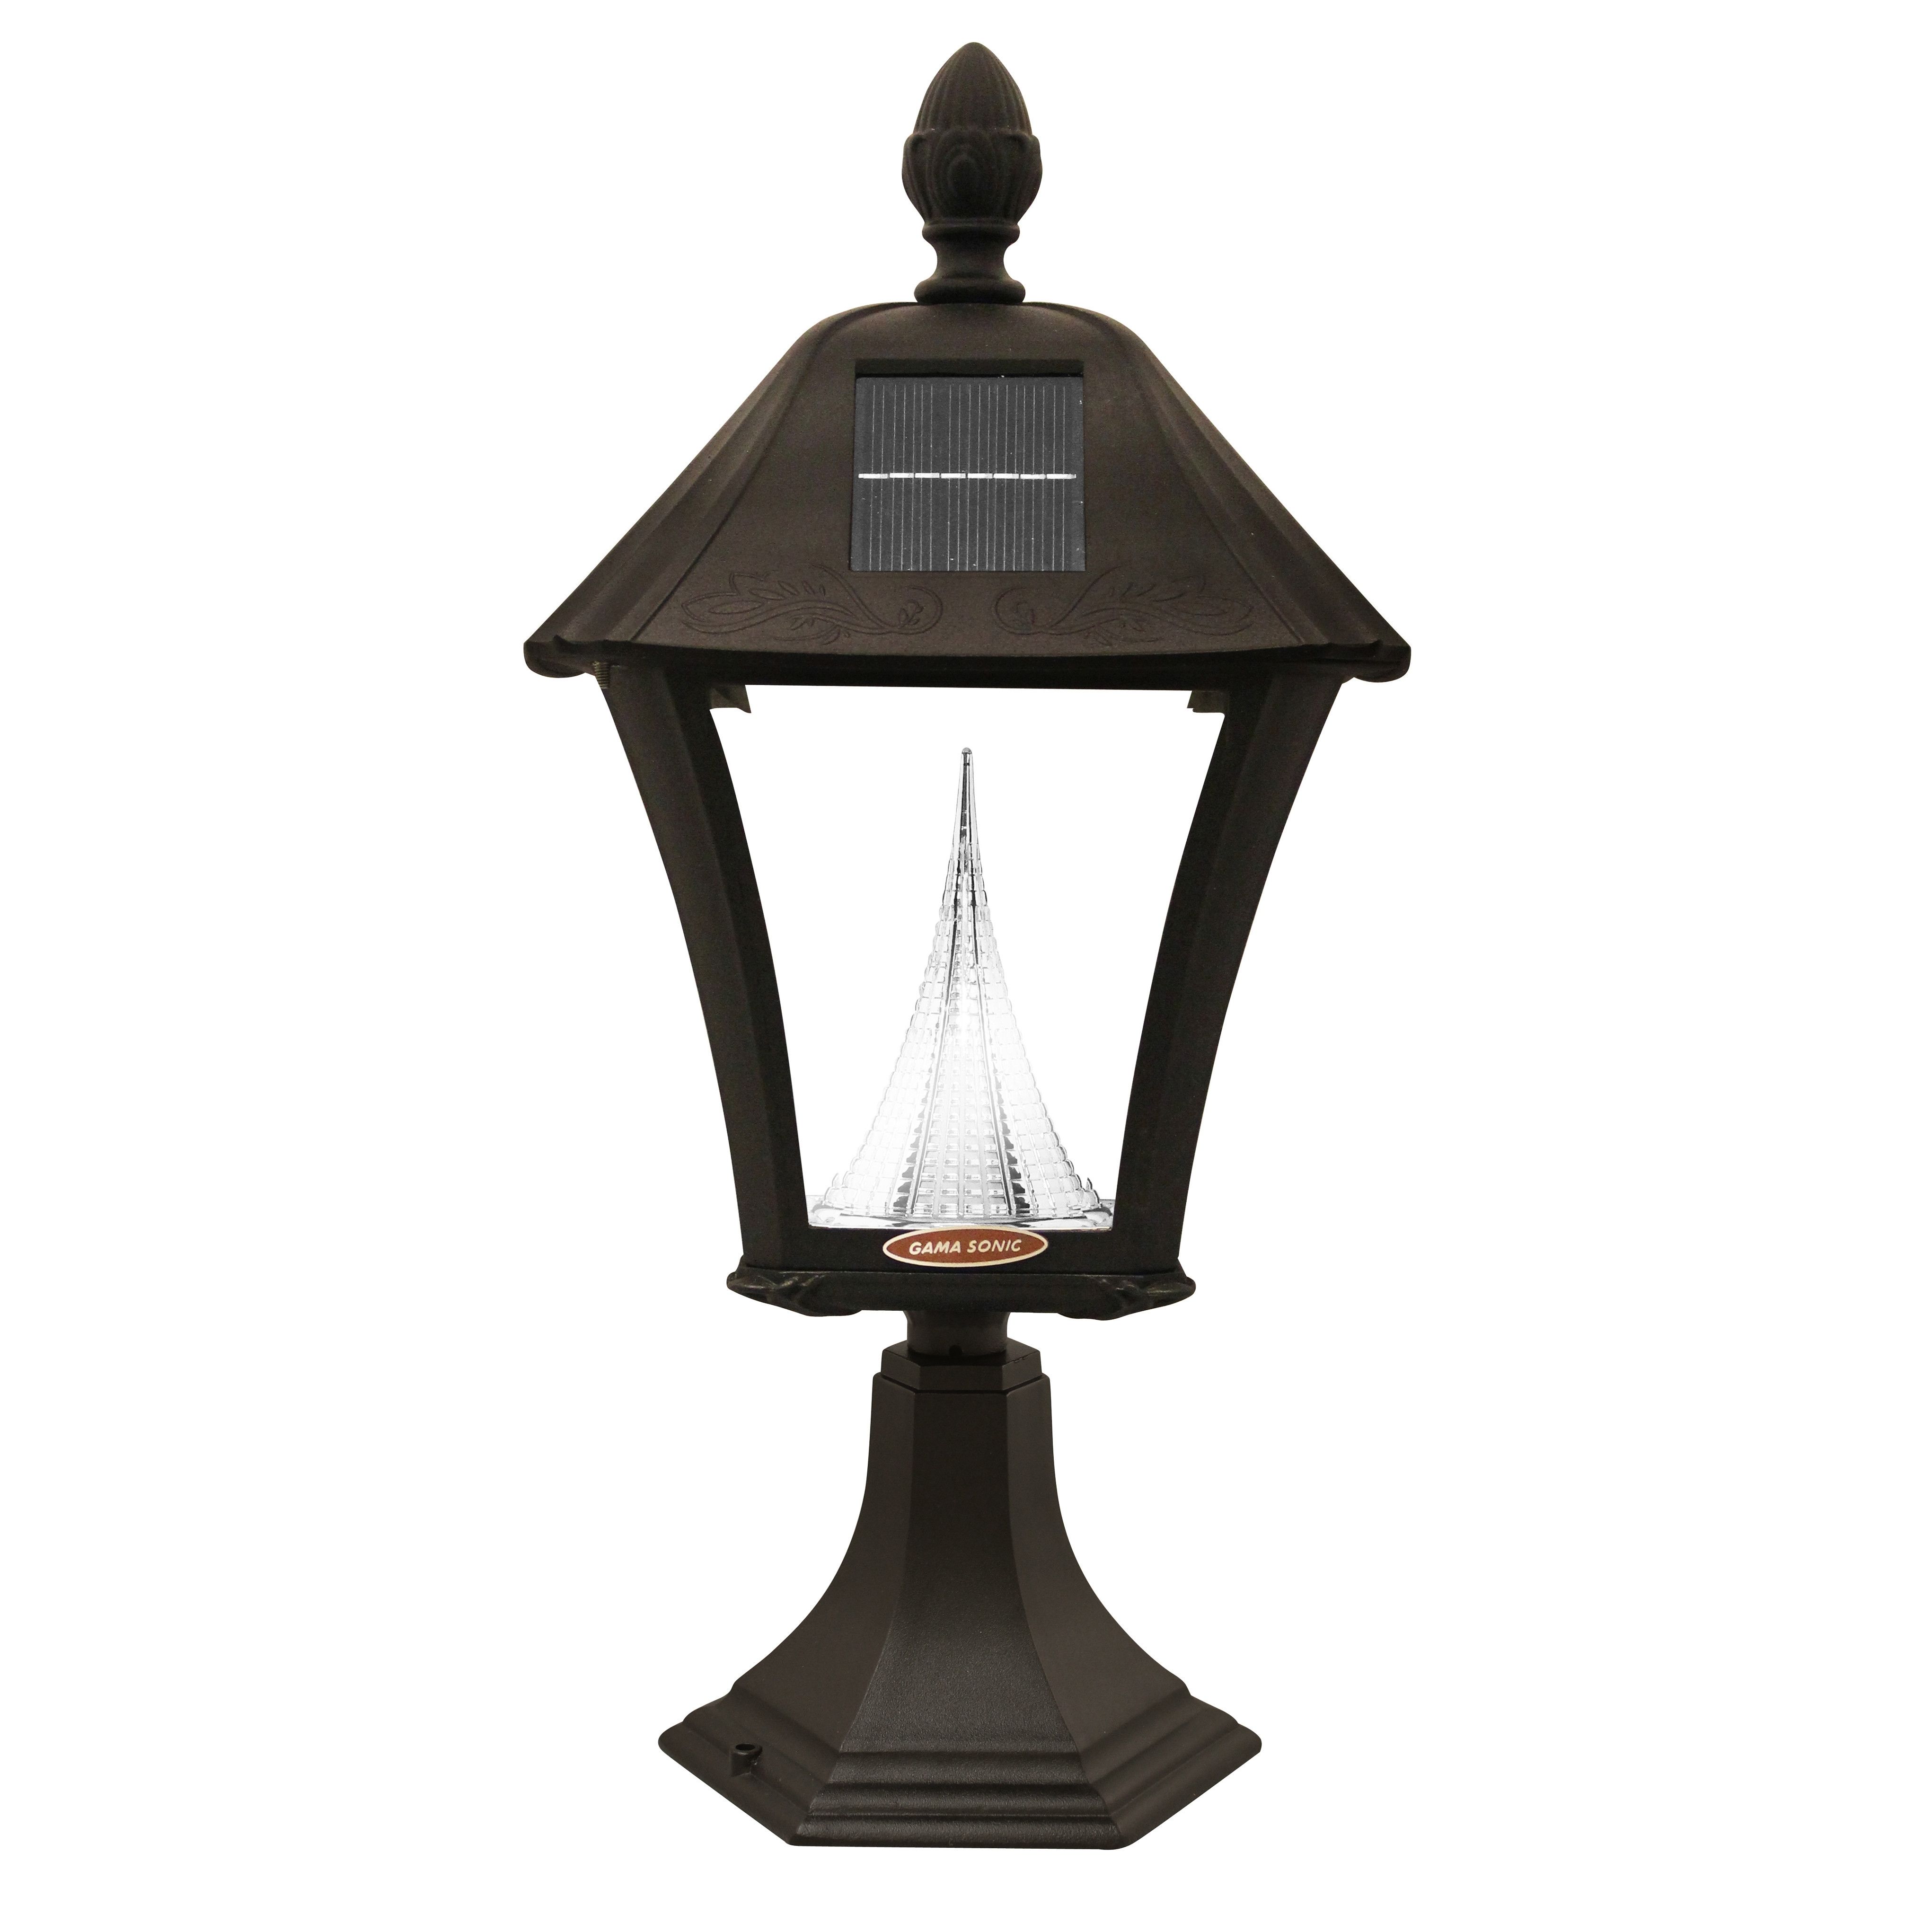 Solar Powered Outdoor Wall Lighting Wayfair Baytown 1 Light Lantern With Battery Operated Outdoor Lights At Wayfair (View 3 of 15)